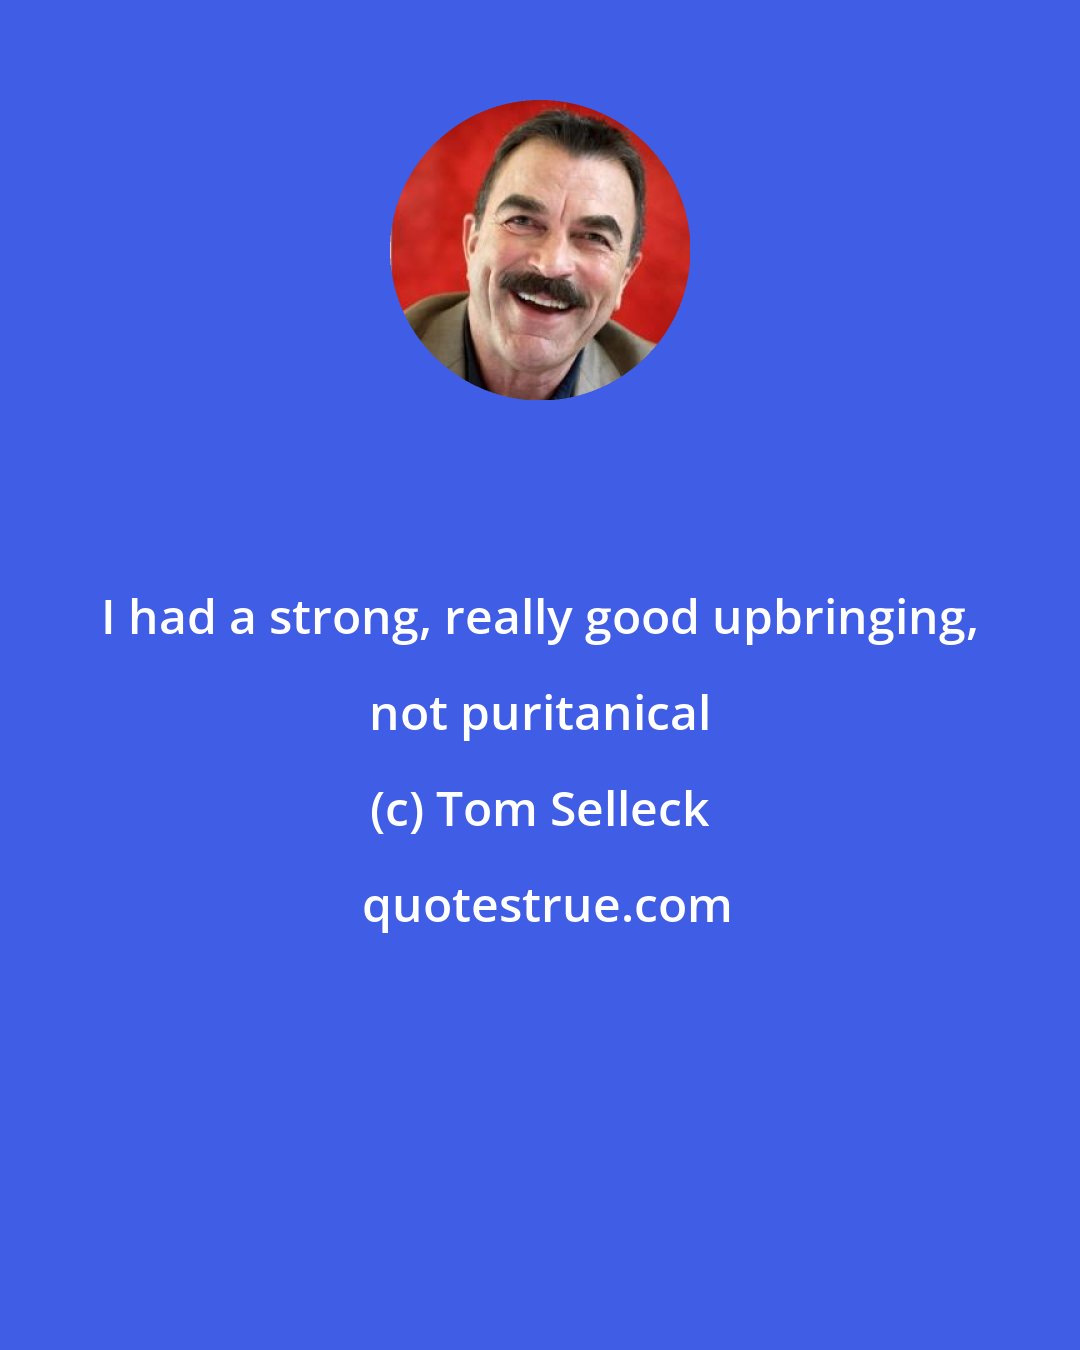 Tom Selleck: I had a strong, really good upbringing, not puritanical